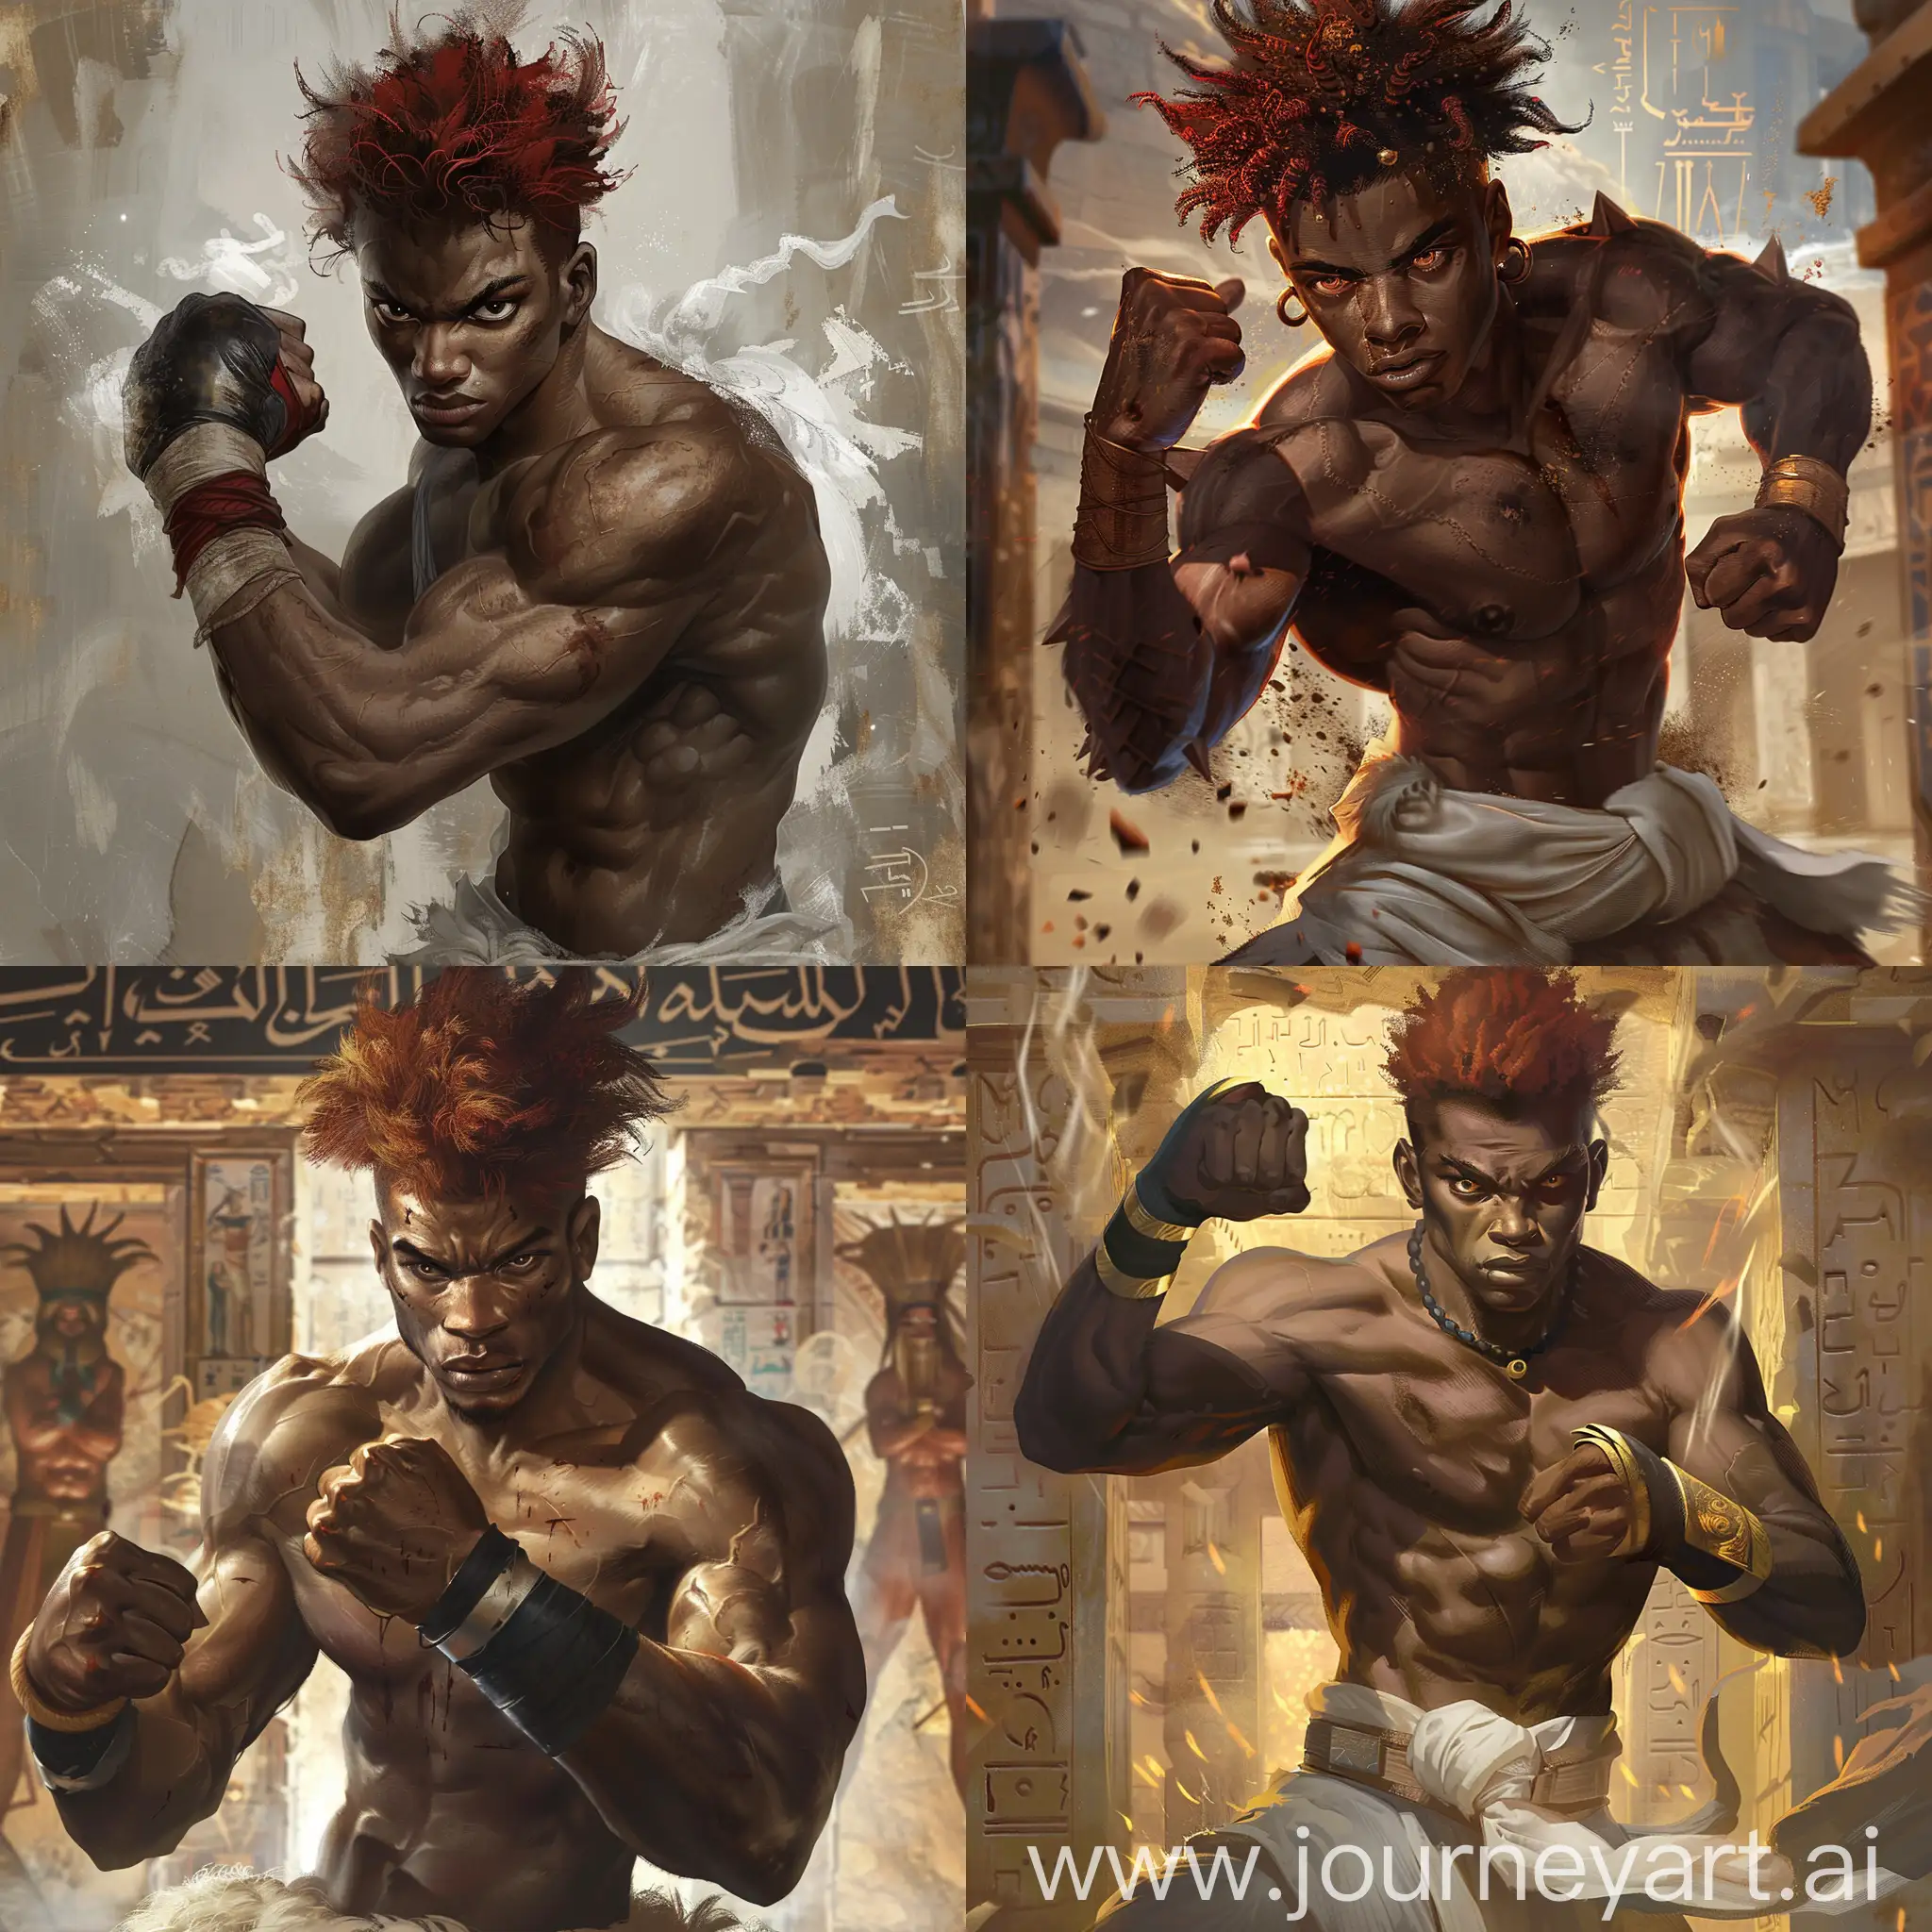 skinny handsome black male, penetrating eyes, red hair, fluffy hair, punching pose, dynamic, various different emotions, ancient near east background setting